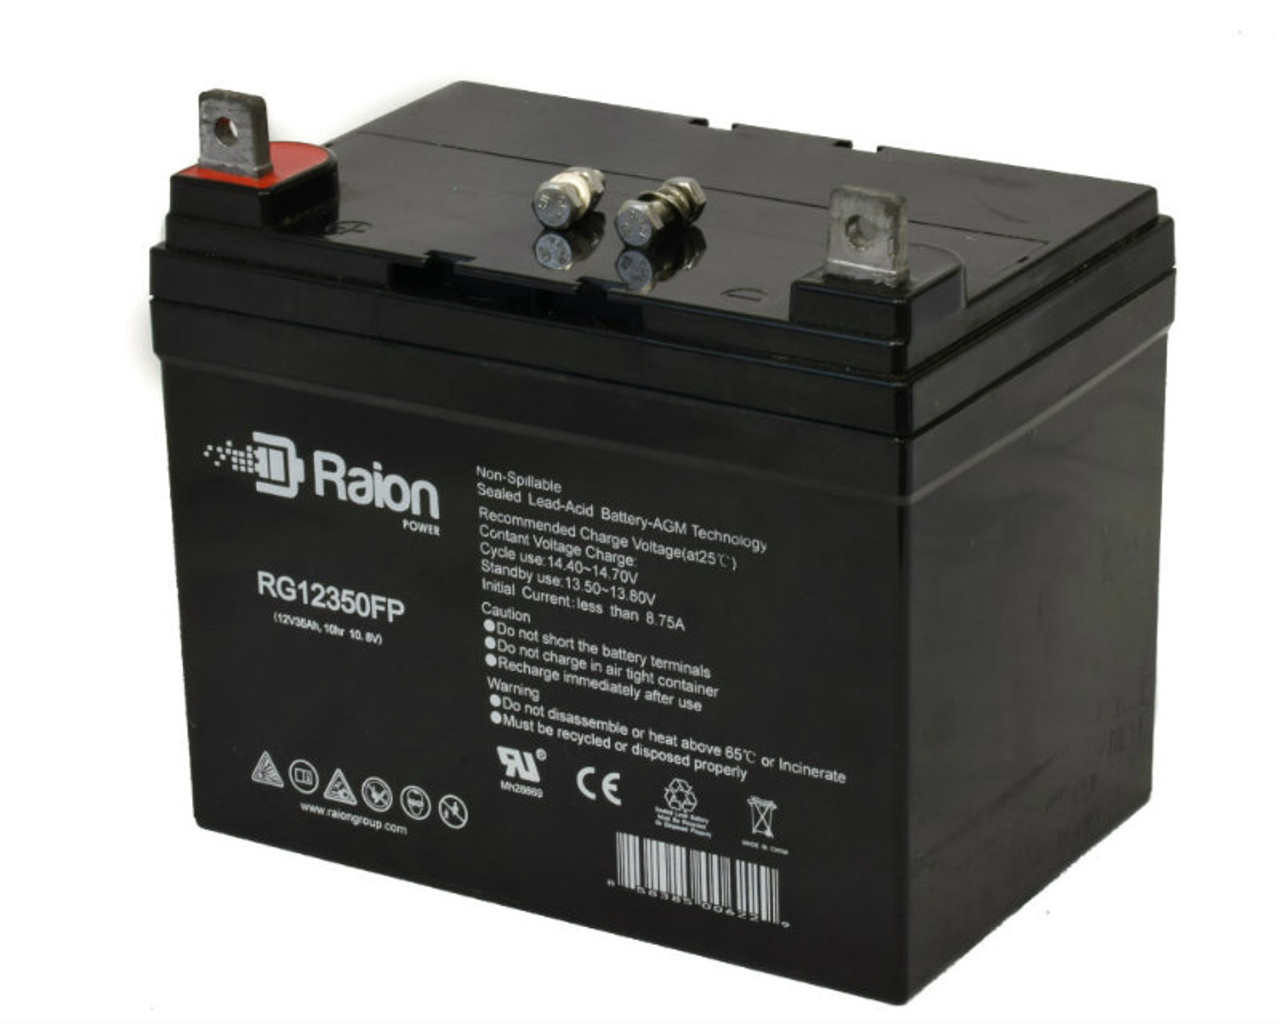 Raion Power Replacement 12V 35Ah RG12350FP Battery for Cub Cadet 182